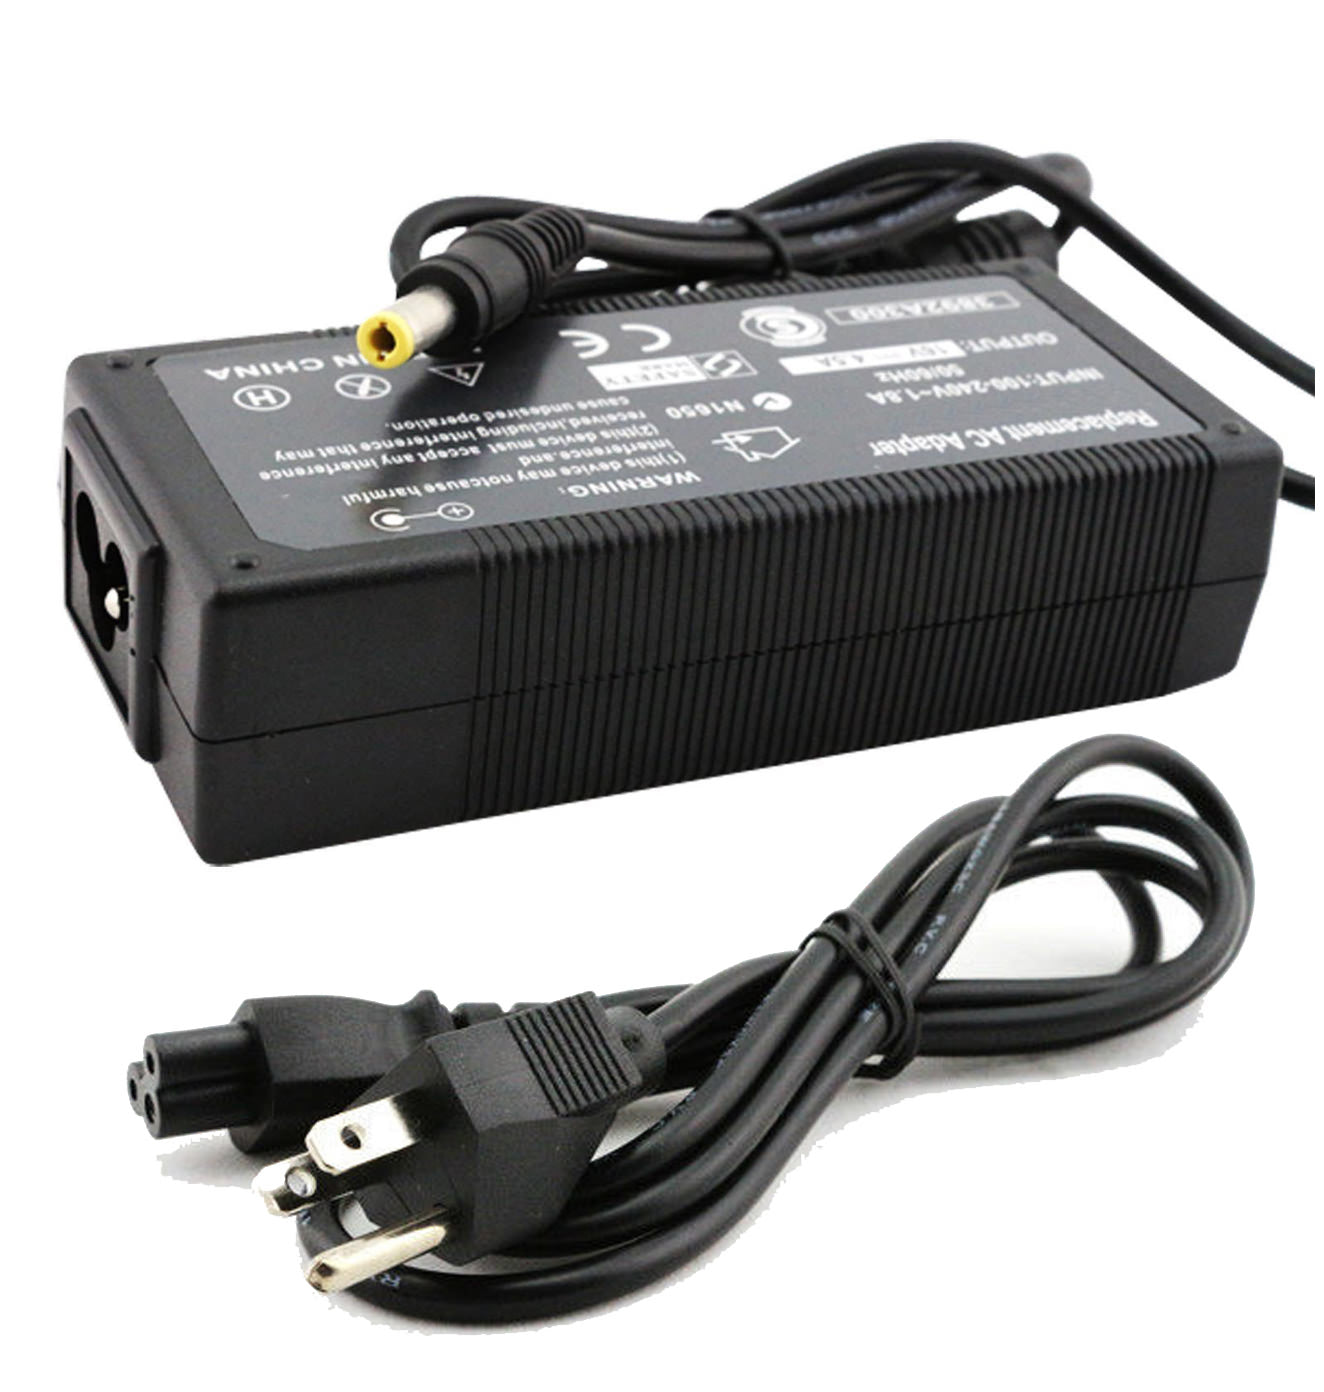 AC Adapter Charger for IBM ThinkPad A21 Notebook.